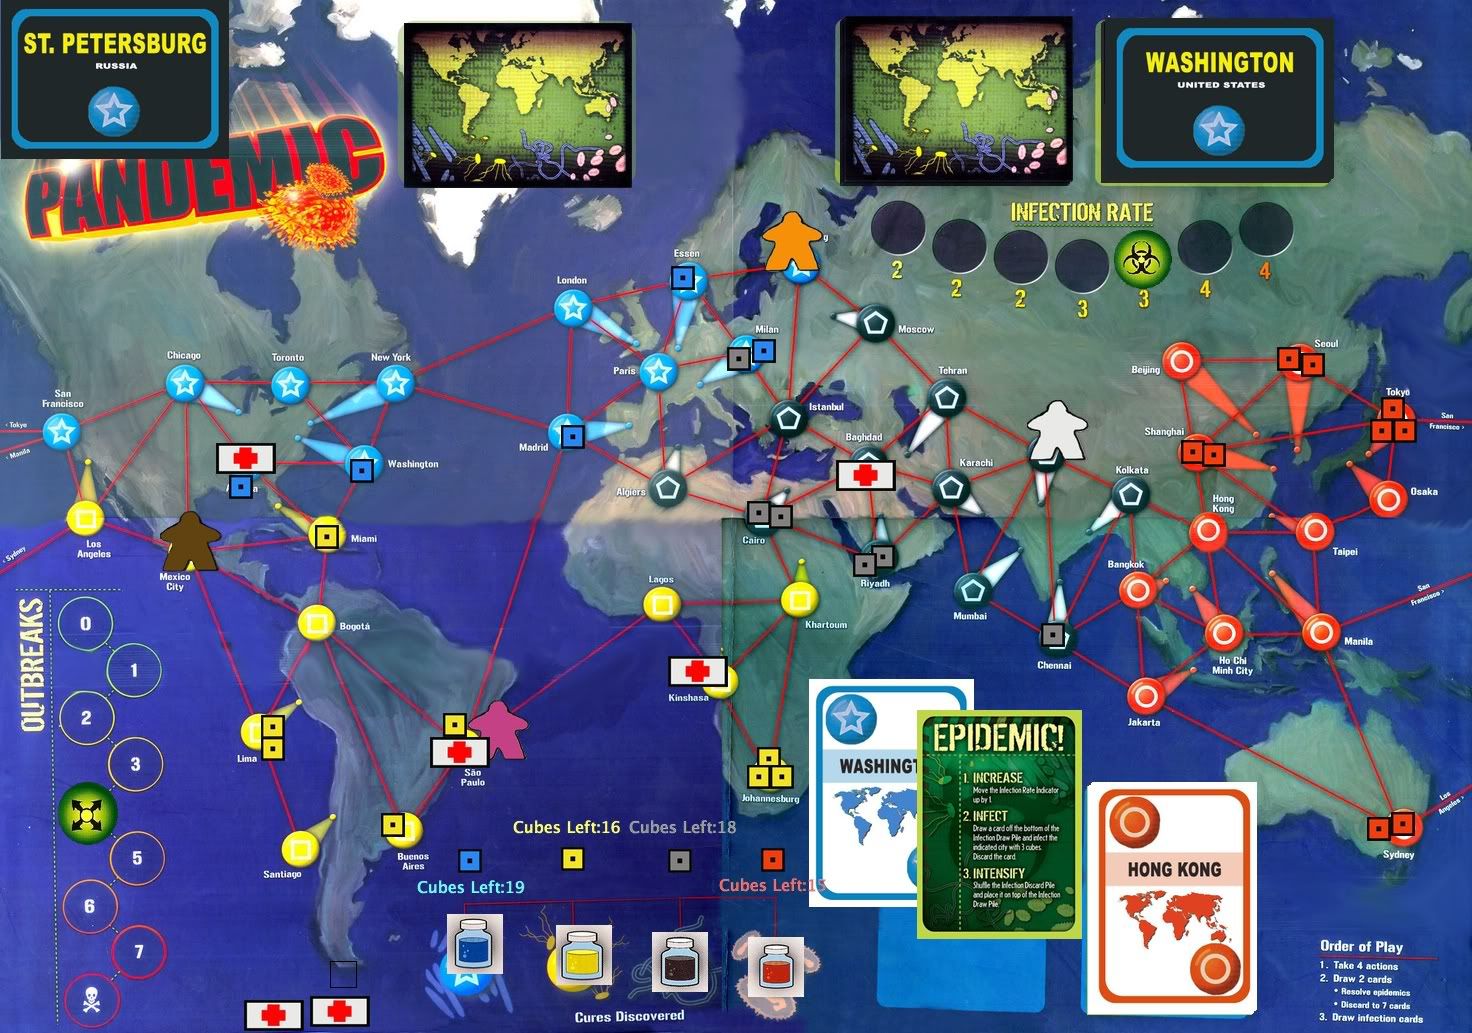 [Game On] Pandemic pbp - Game over, CDC success - Page 3 ...